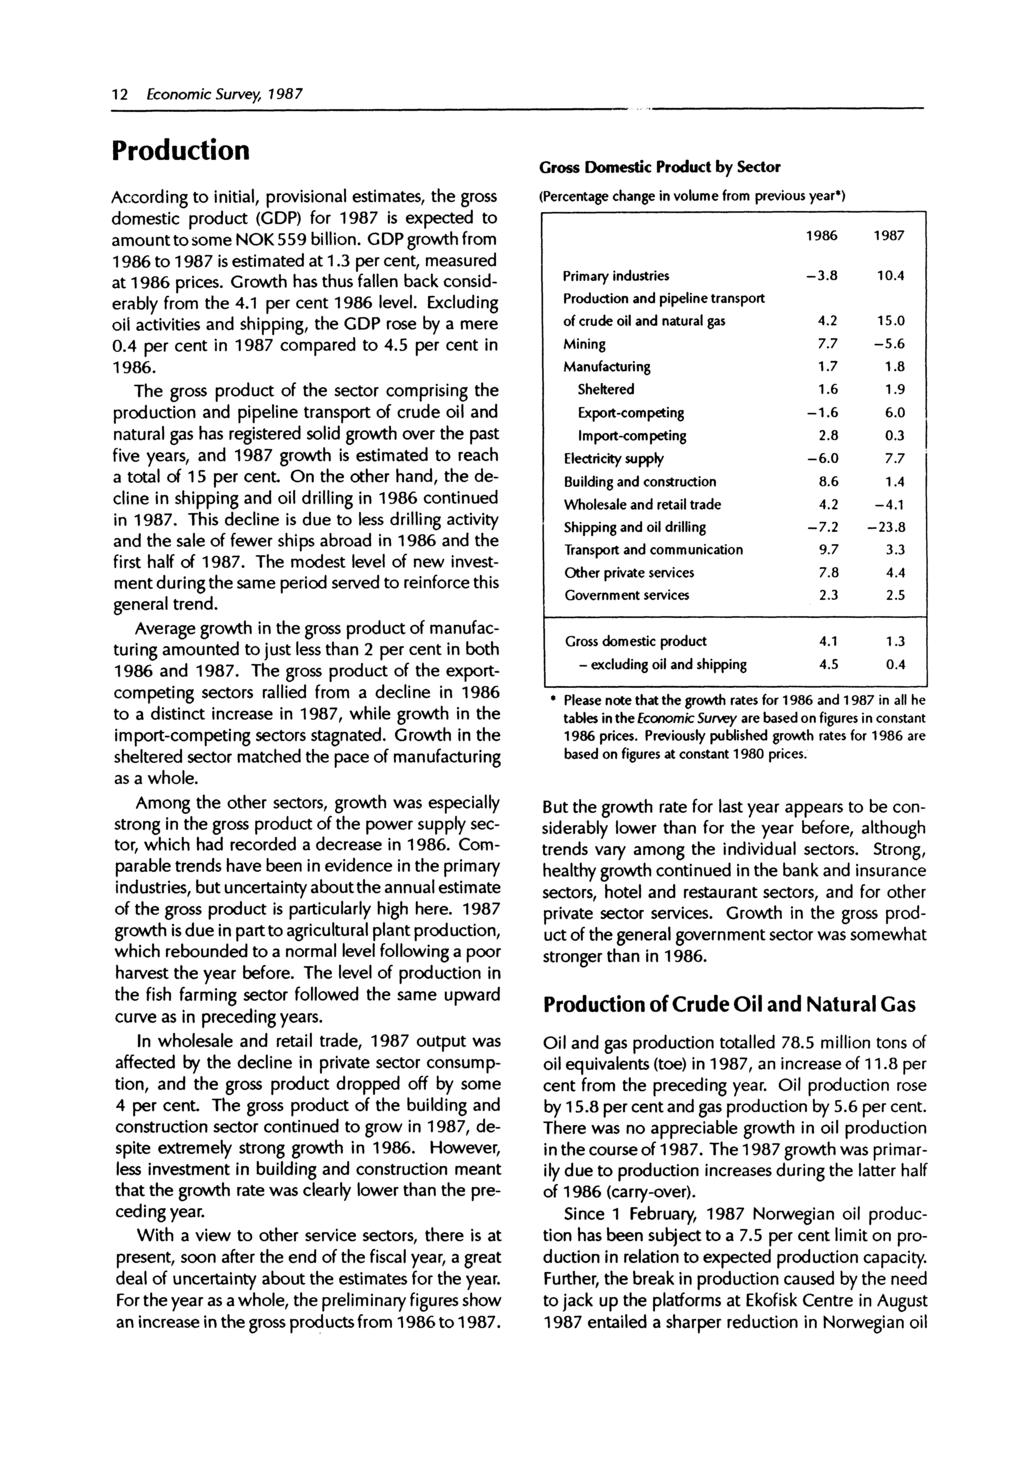 12 Economic Survey, 1987 Production According to initial, provisional estimates, the gross domestic product (GDP) for 1987 is expected to amount to some NOK 559 billion.